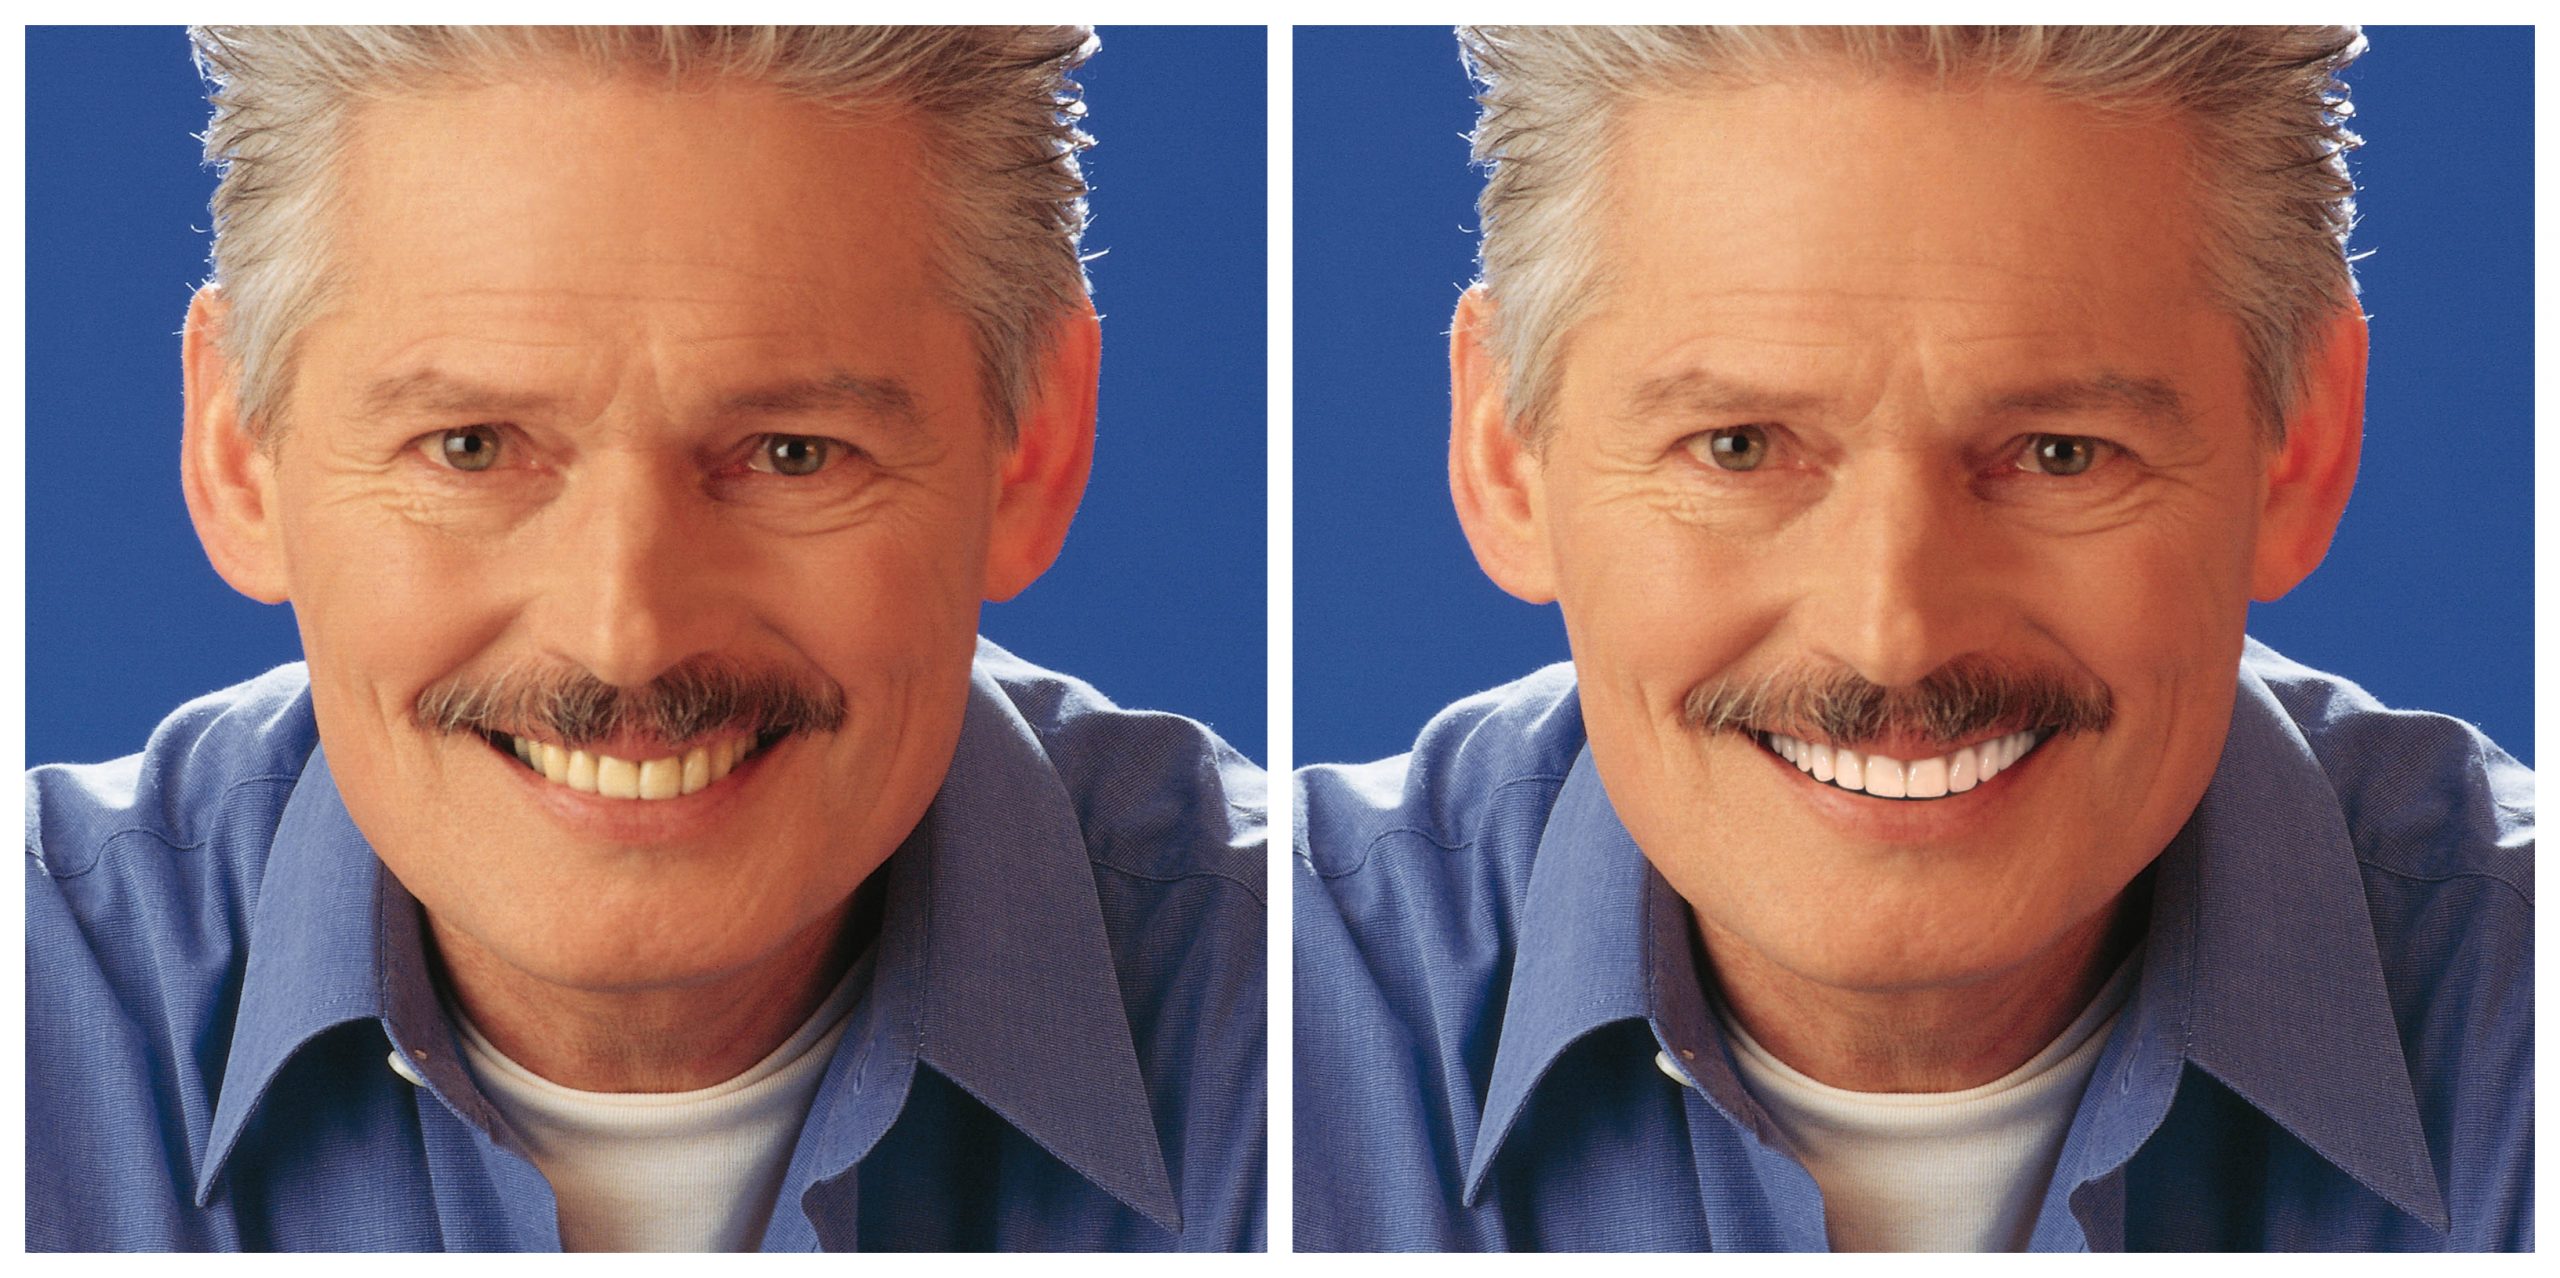 Smile Restoration - Before and After13